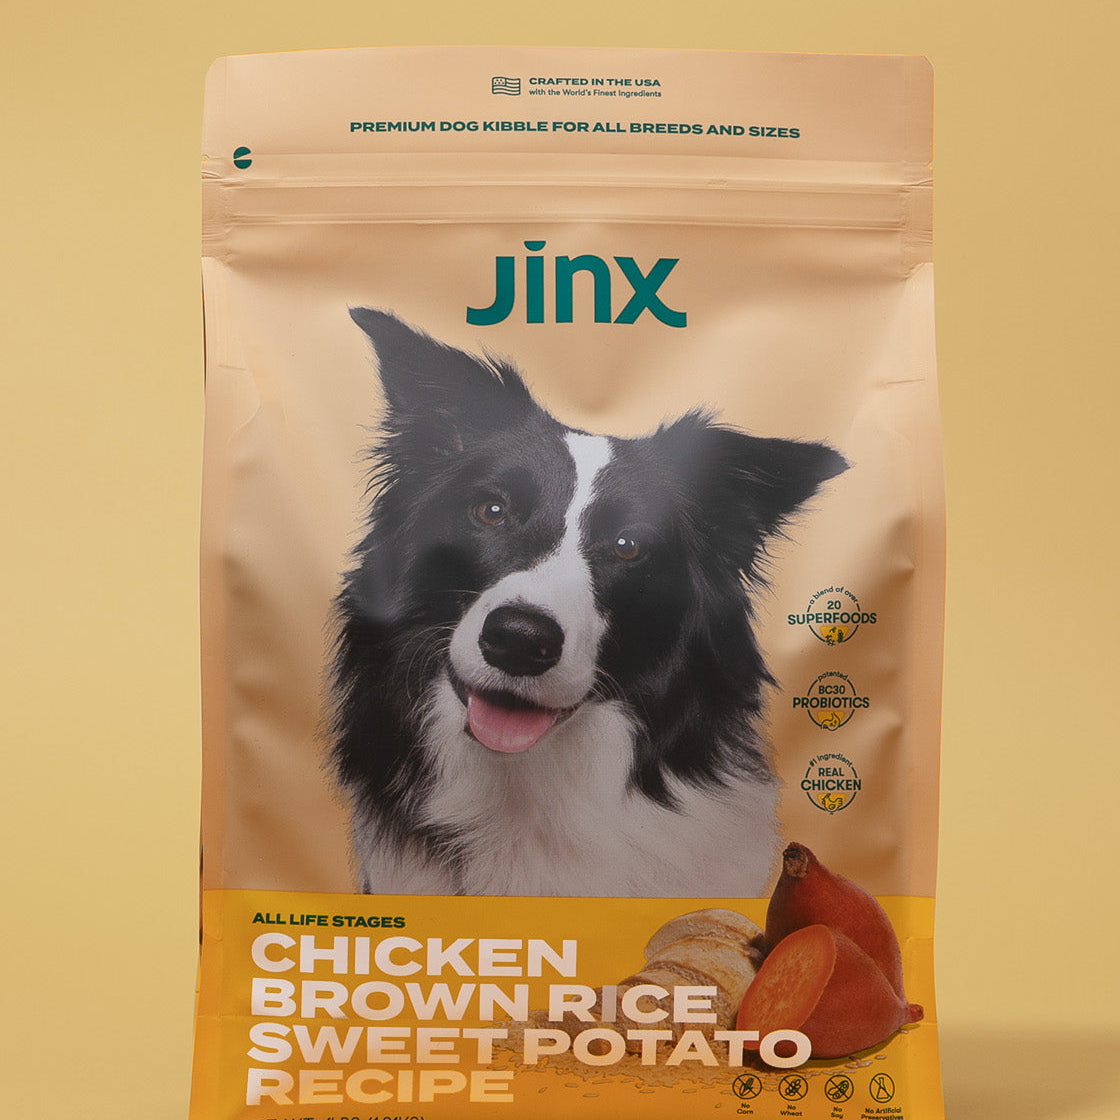 Chicken essentials Jinx bundle with chicken, brown rice & sweet potato Jinx dog kibble product packaging on yellow background.